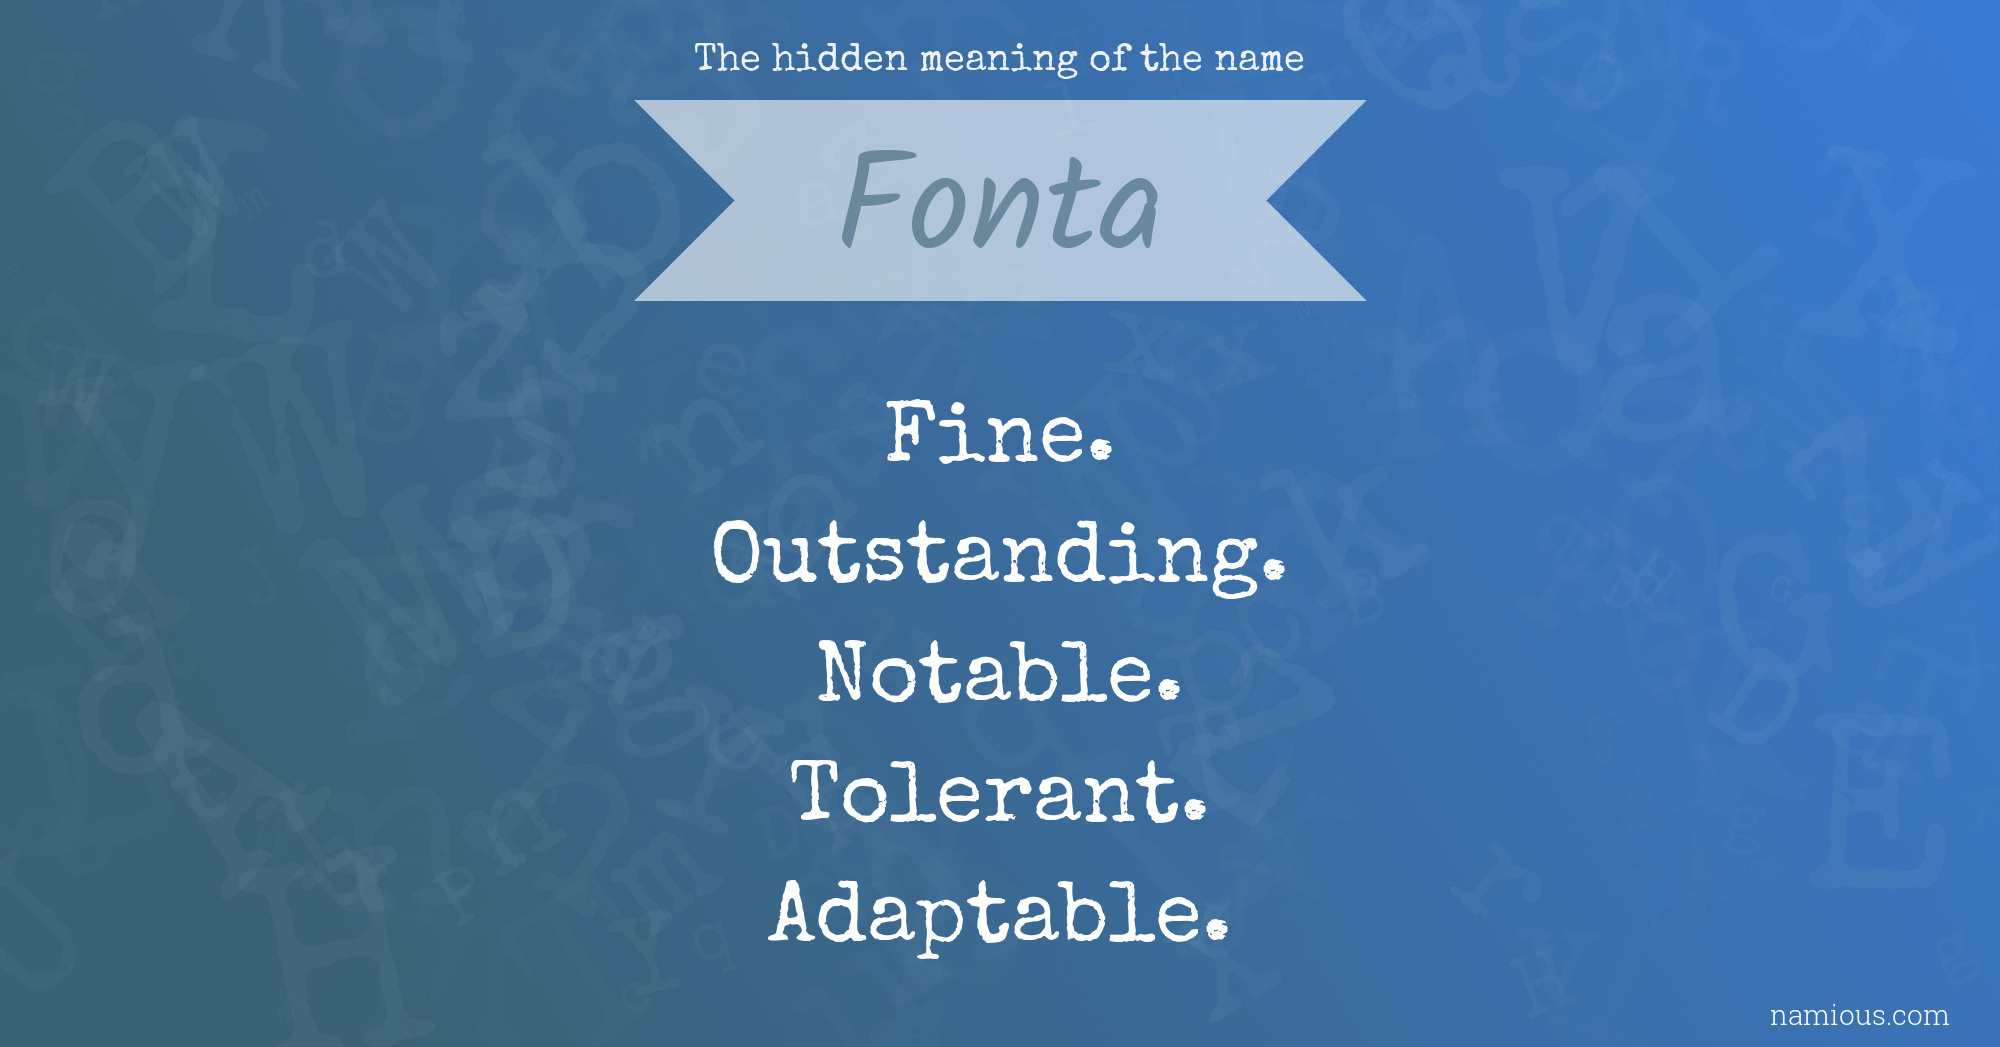 The hidden meaning of the name Fonta